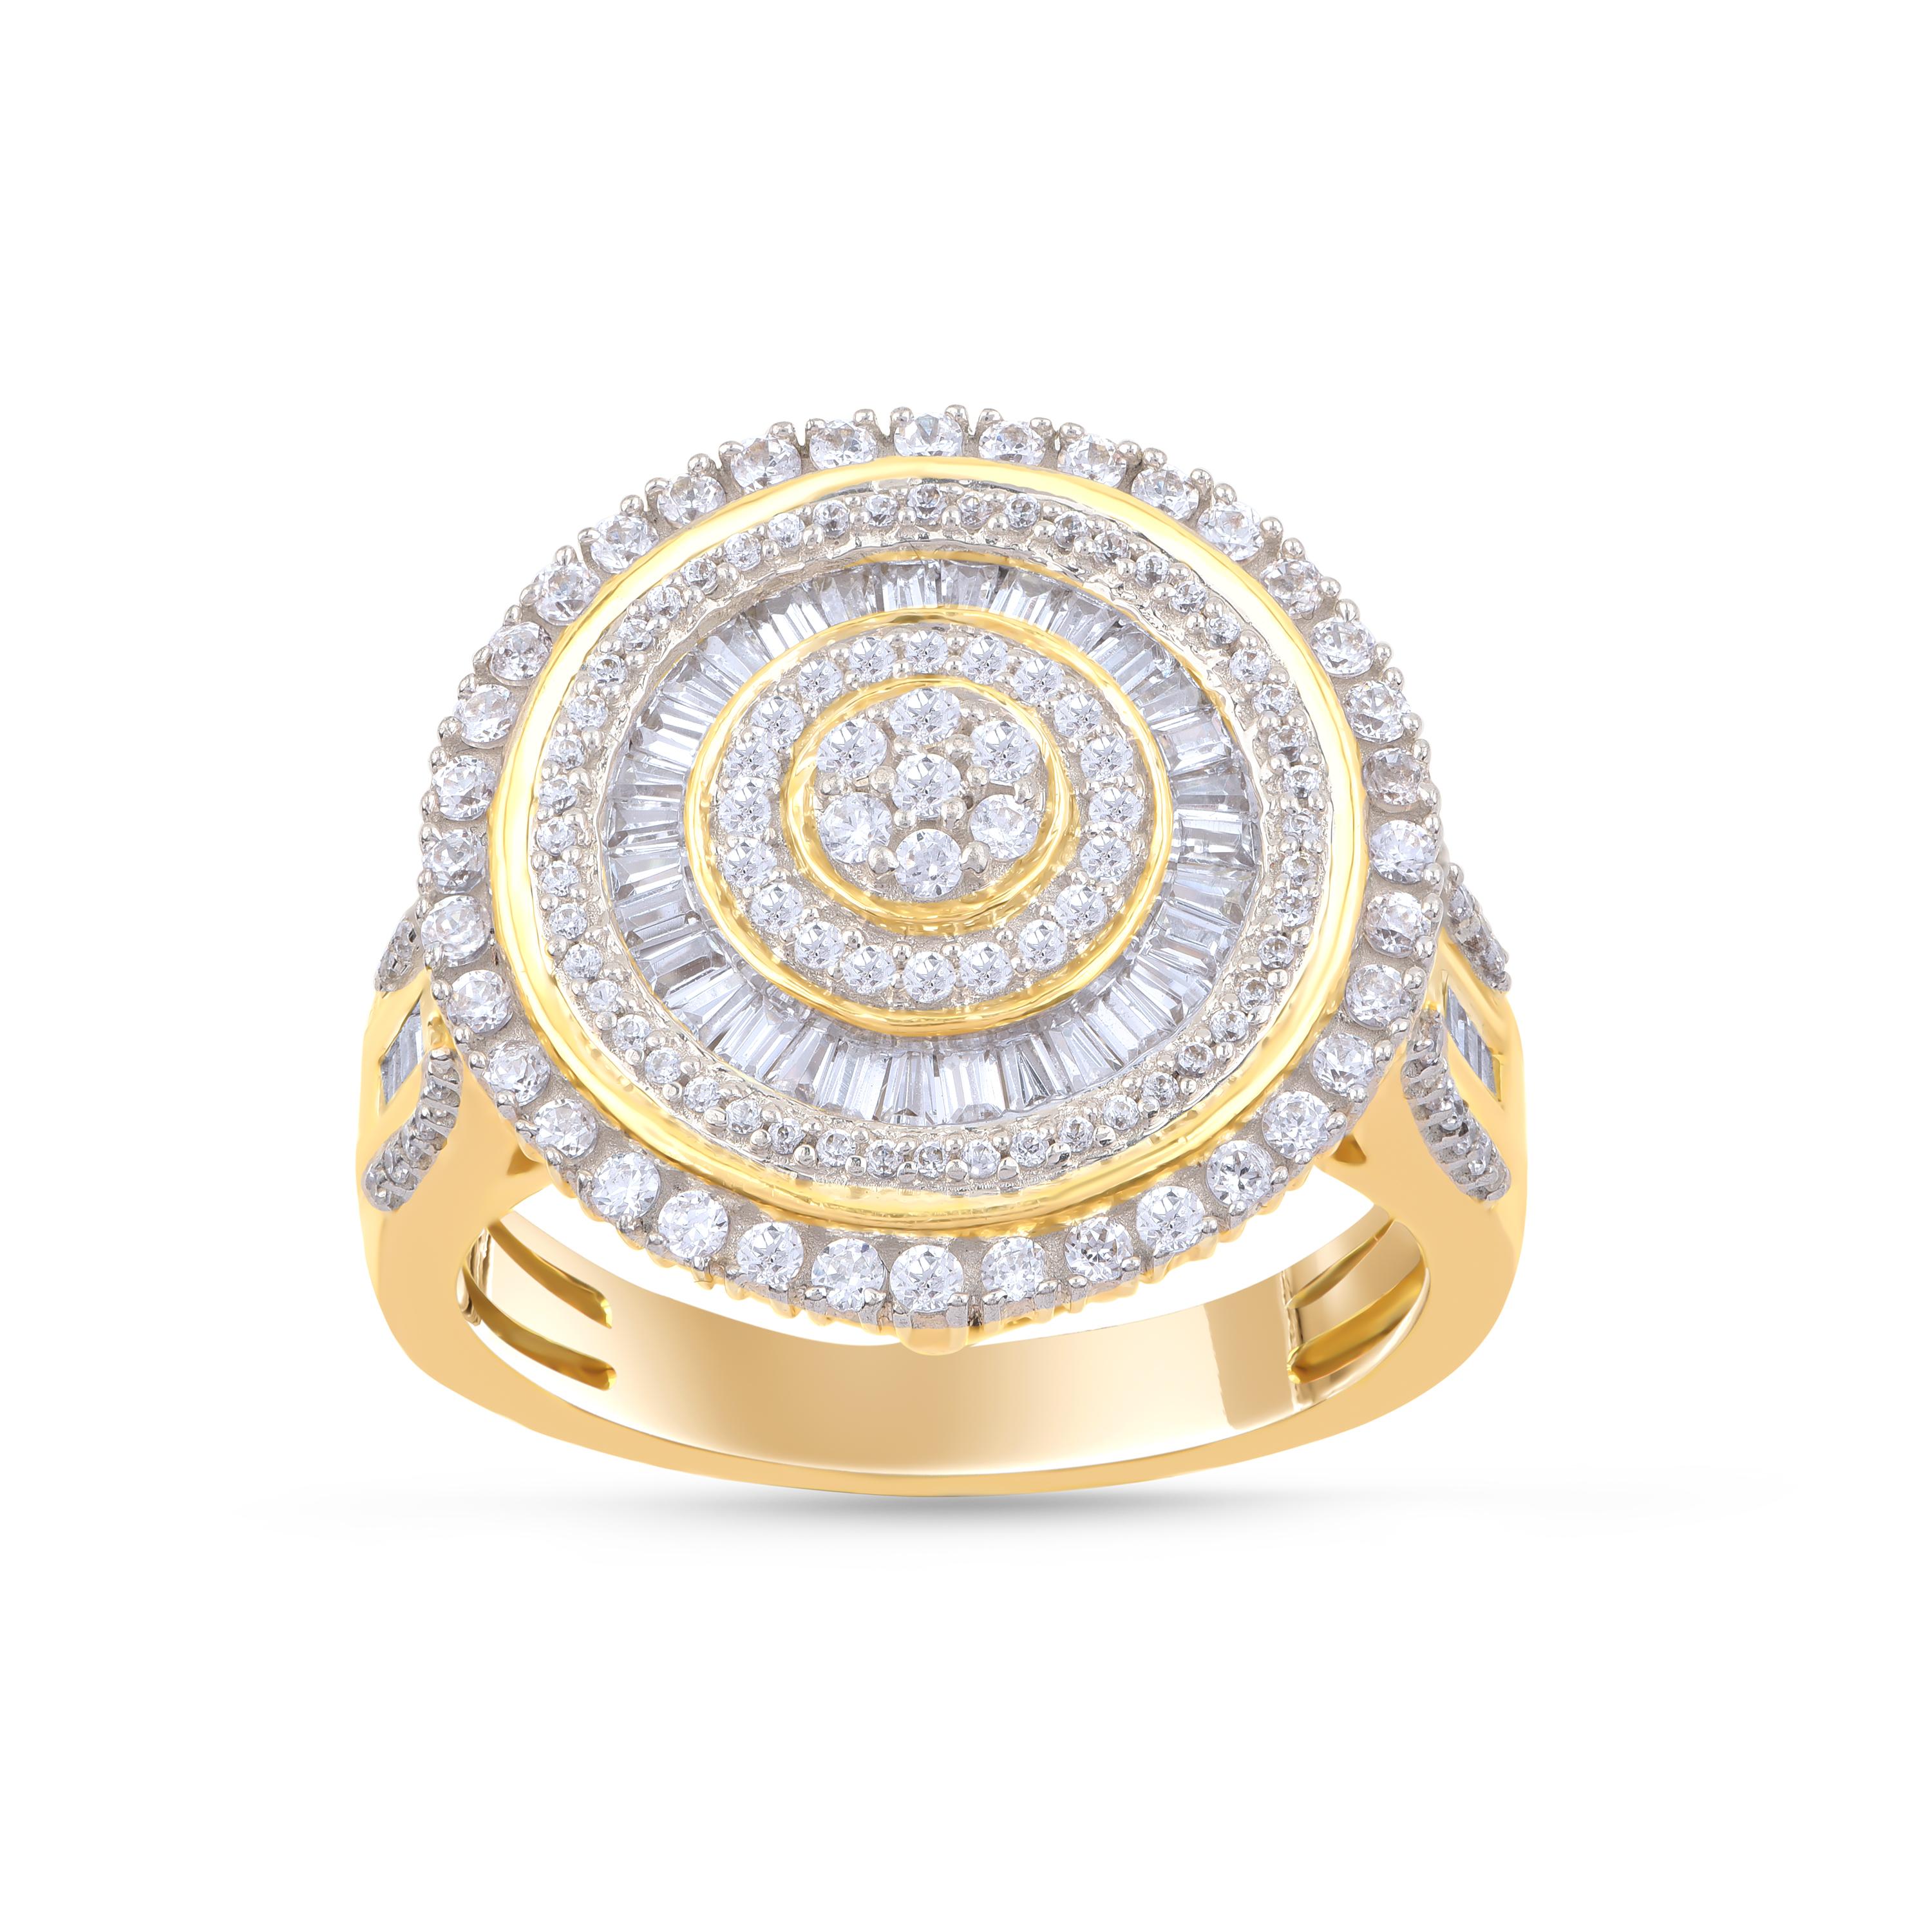 This diamond engagement ring shimmers with 139 brilliant cut diamonds and 52 baguette in pave, prong and channel setting and crafted in 18 kt yellow gold. The diamonds in this ring are graded H-I Color, I2 Clarity. 

Metal color and ring size can be